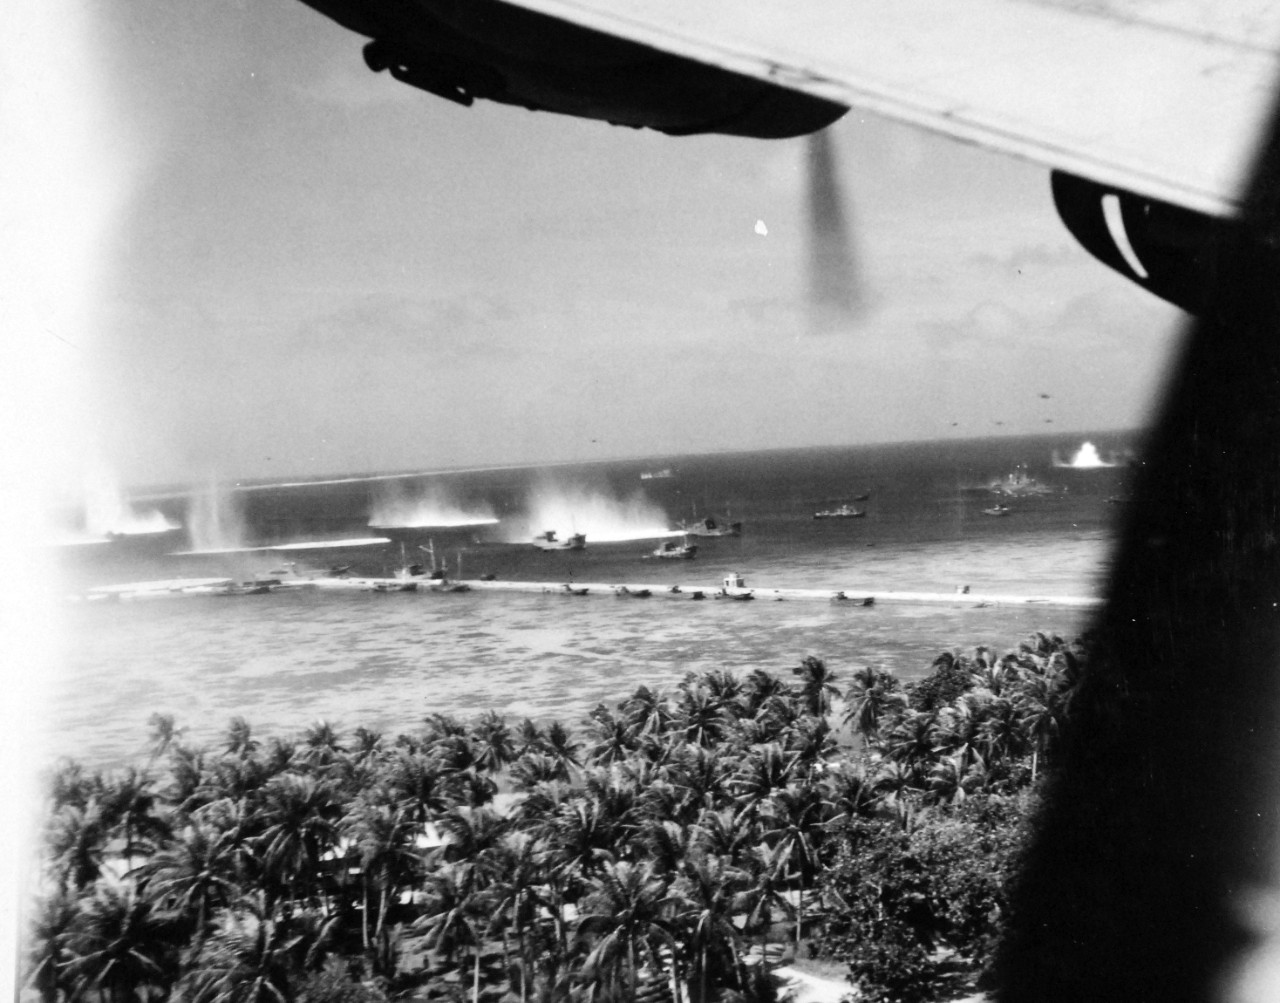 80-G-208528:    Pre-Raid Bombardment of Kwajalein Island, January 12, 1944.   Bombing of Japanese merchant ships at Kwajalein Atoll, Marshall Islands by Bombing Squadron One Hundred Eight (VB-108), January 12, 1944.    Official U.S. Navy Photograph, now in the collections of the National Archives.  (2017/06/27).